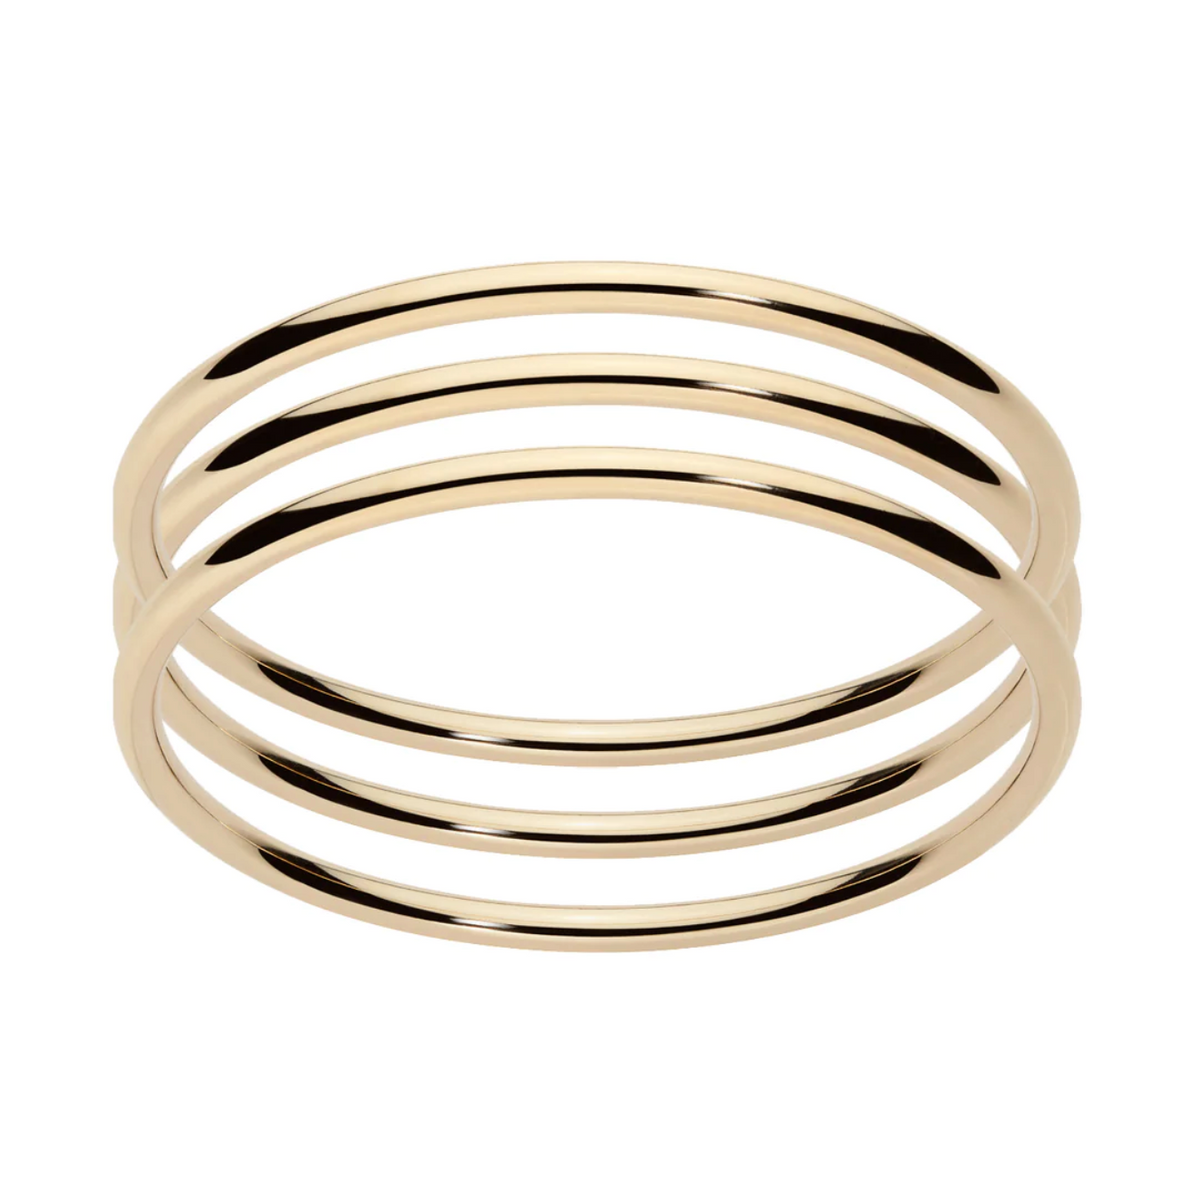 CLASSIC CYLINDER BANGLES – Millo Jewelry